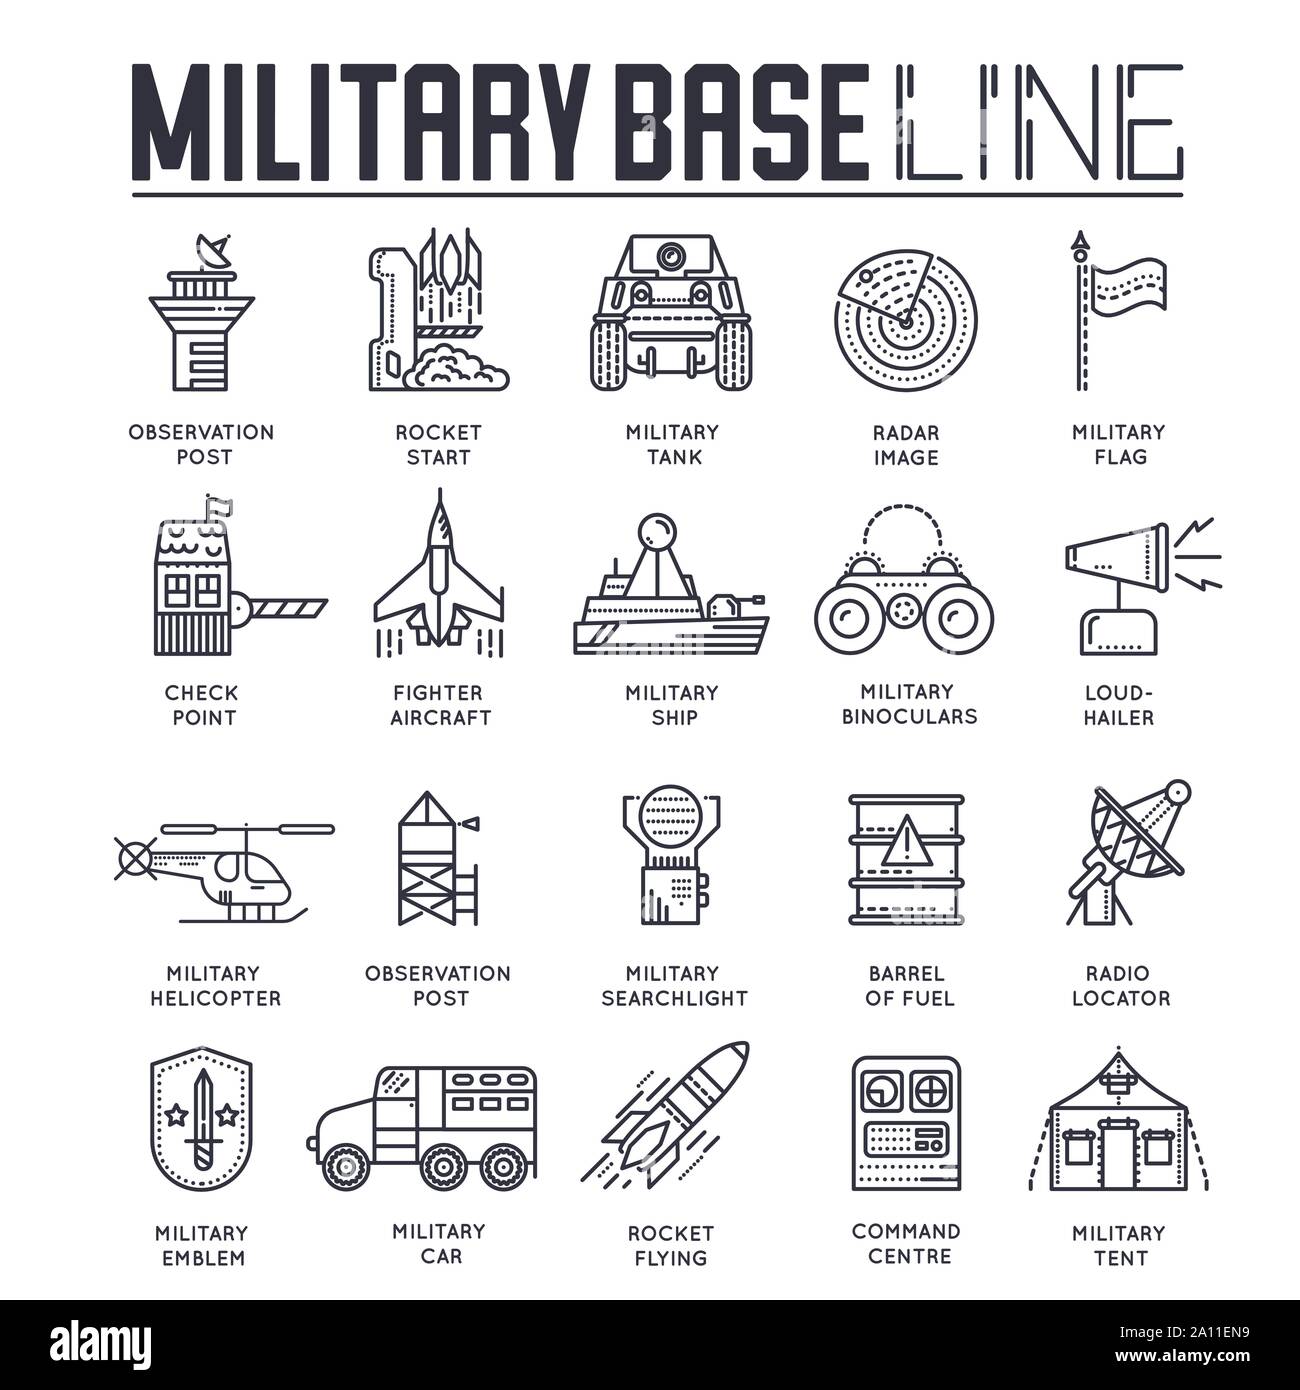 Set of military base thin line icons isolated on white background. Warlike equipment, transport outline pictograms collection. Armed power, forces vector elements for infographic, web. Stock Vector